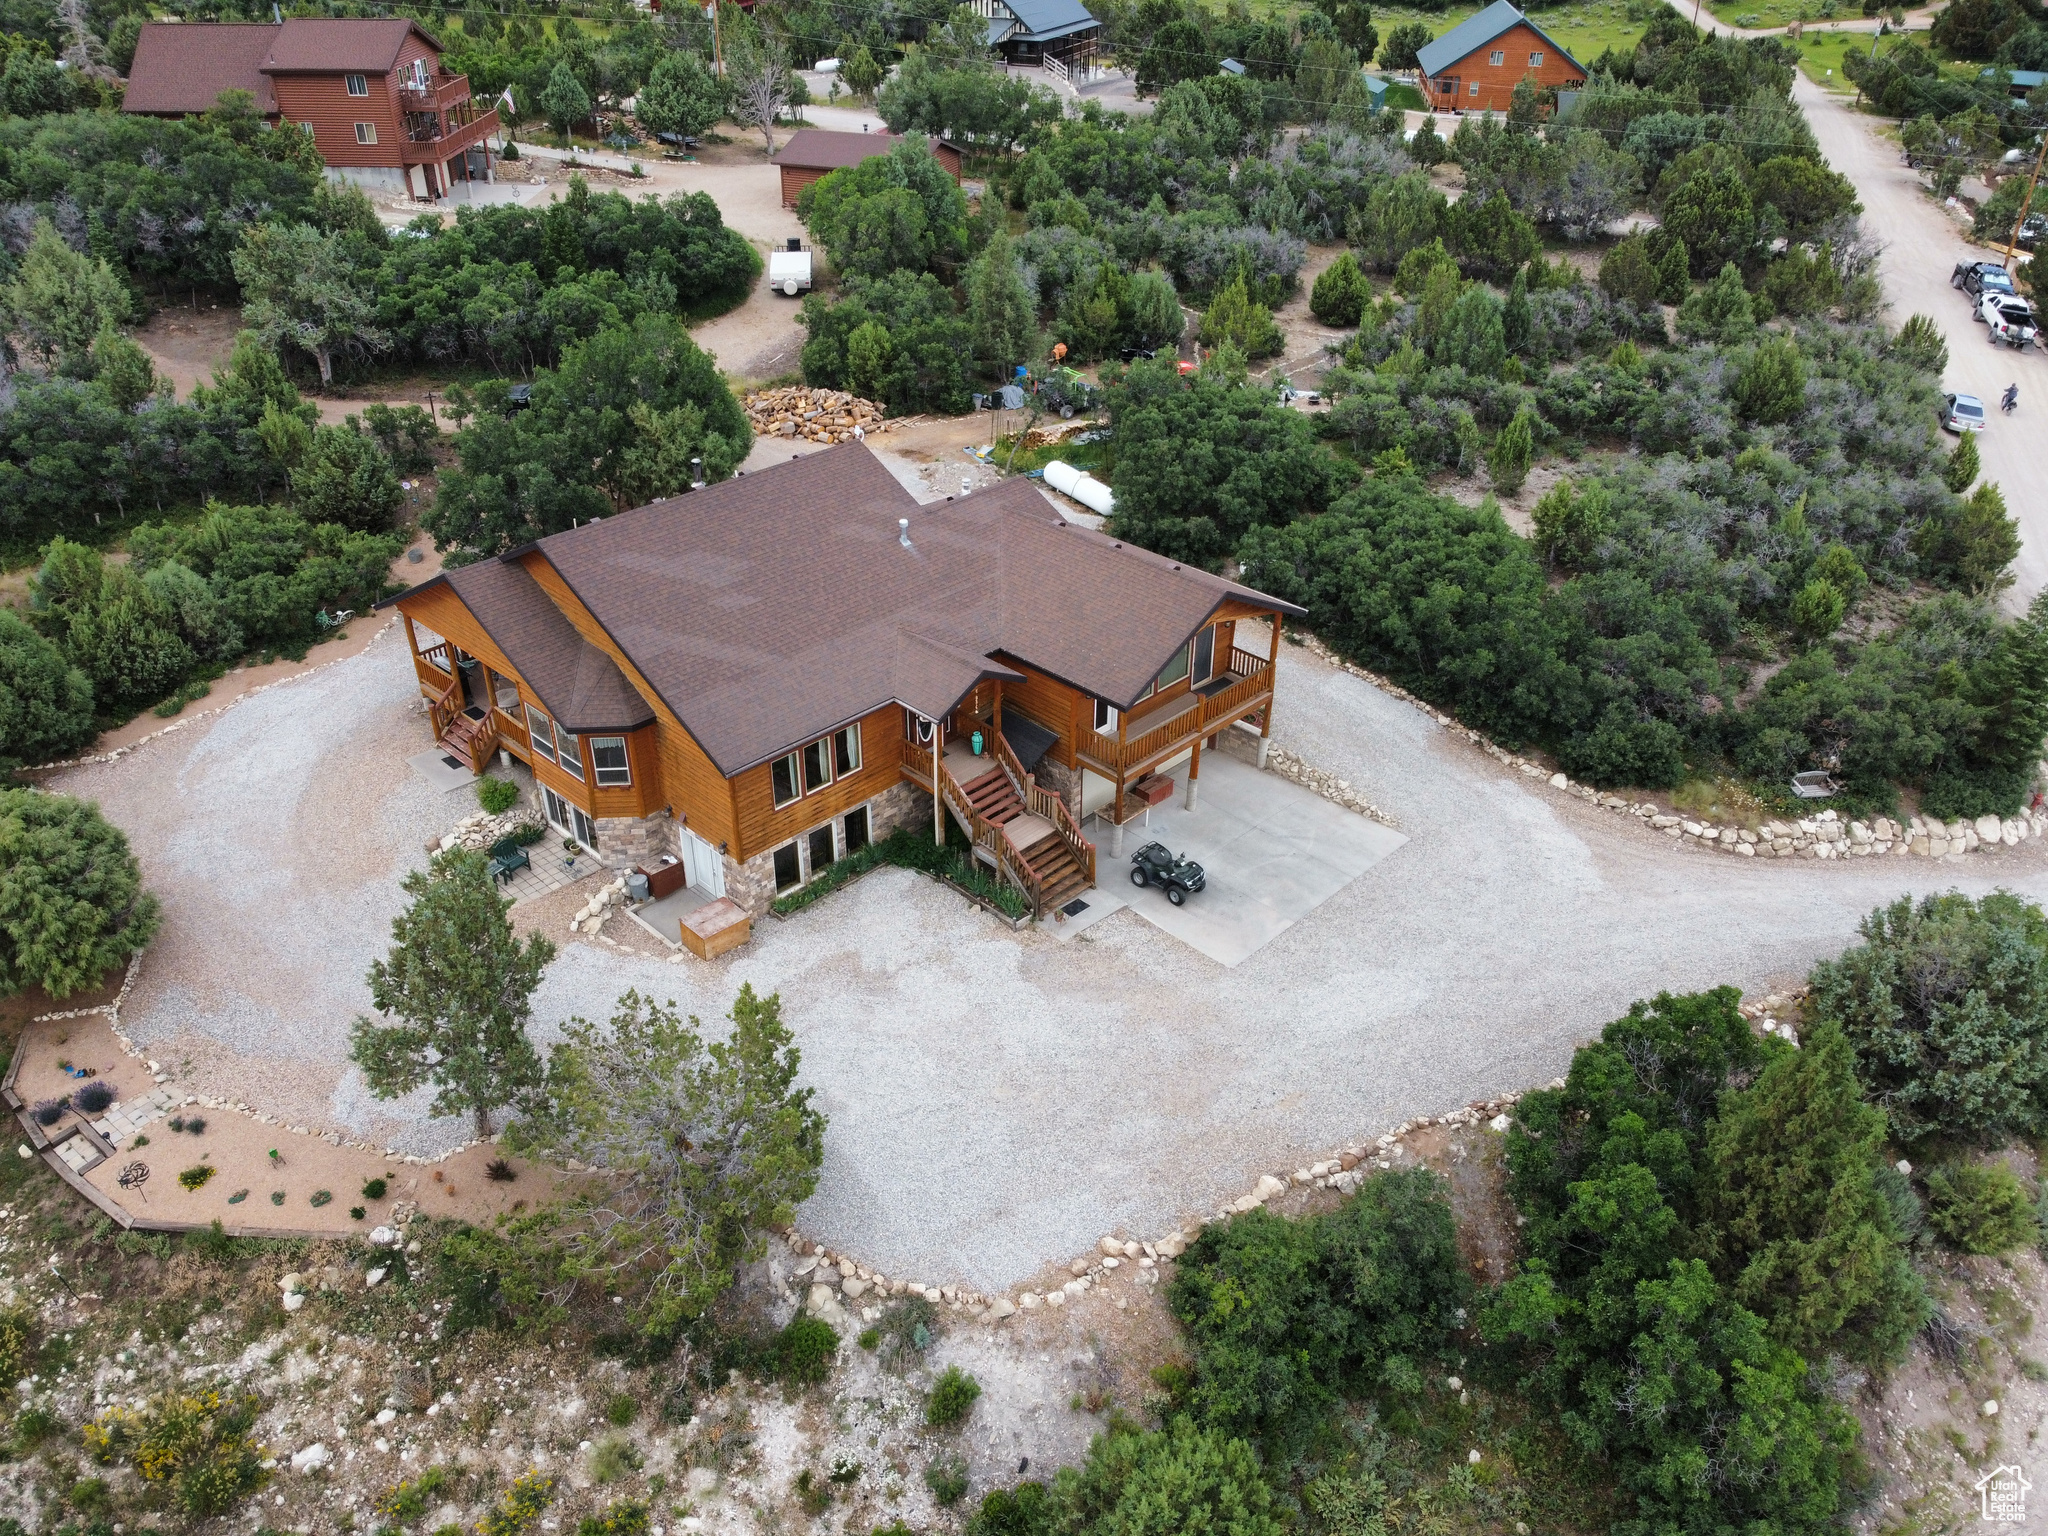 Drone Shot of the property